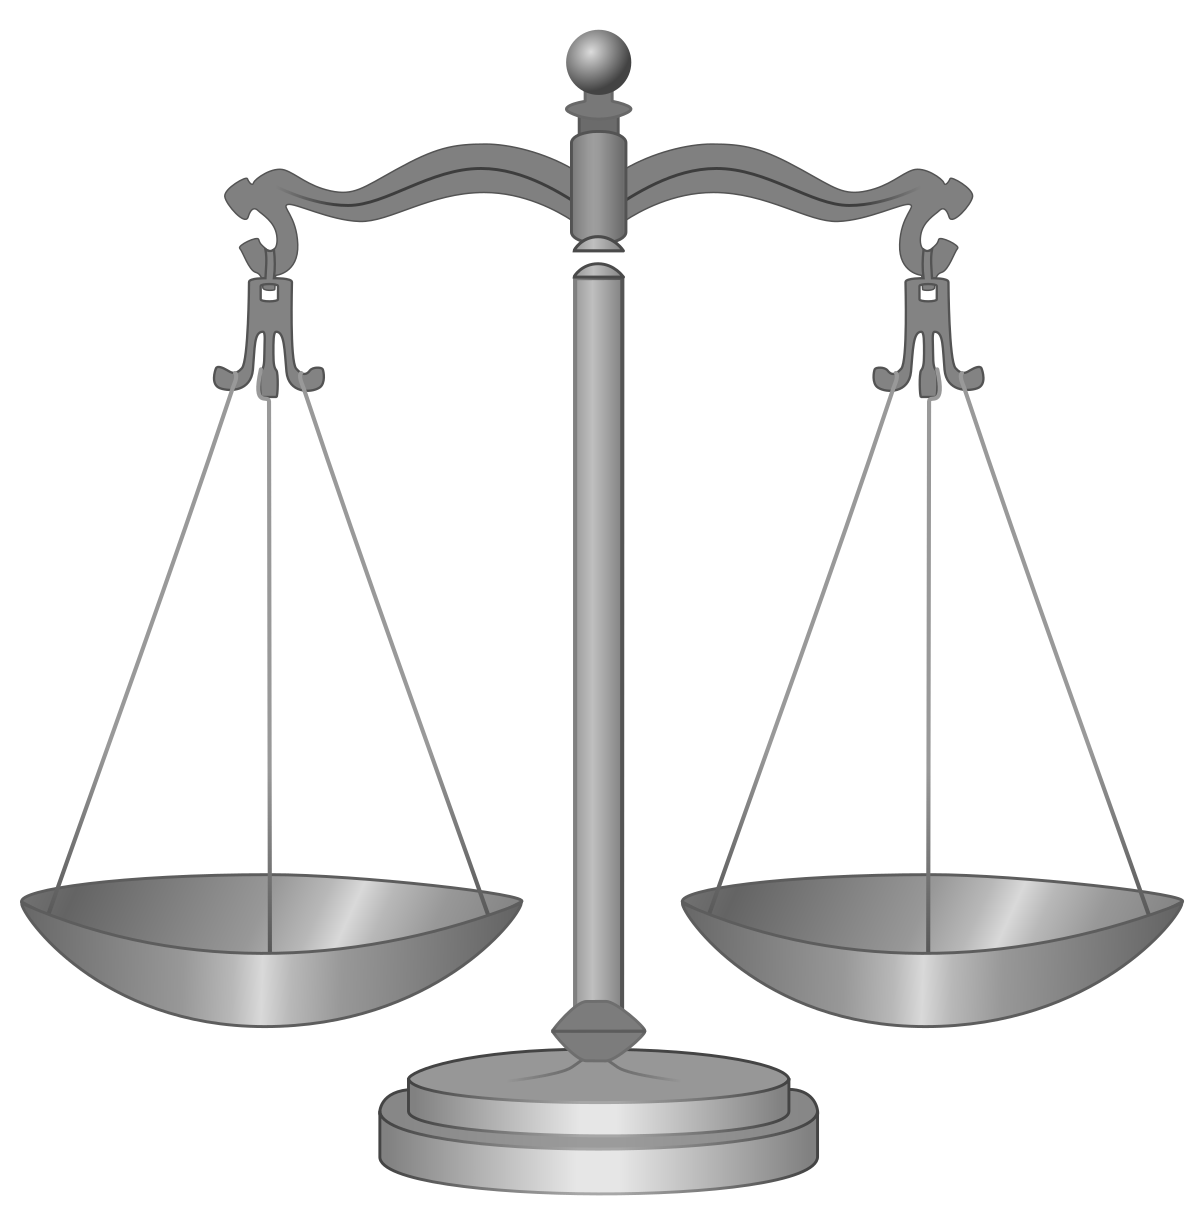 Balance scale with a plus sign on one side and a minus sign on the other